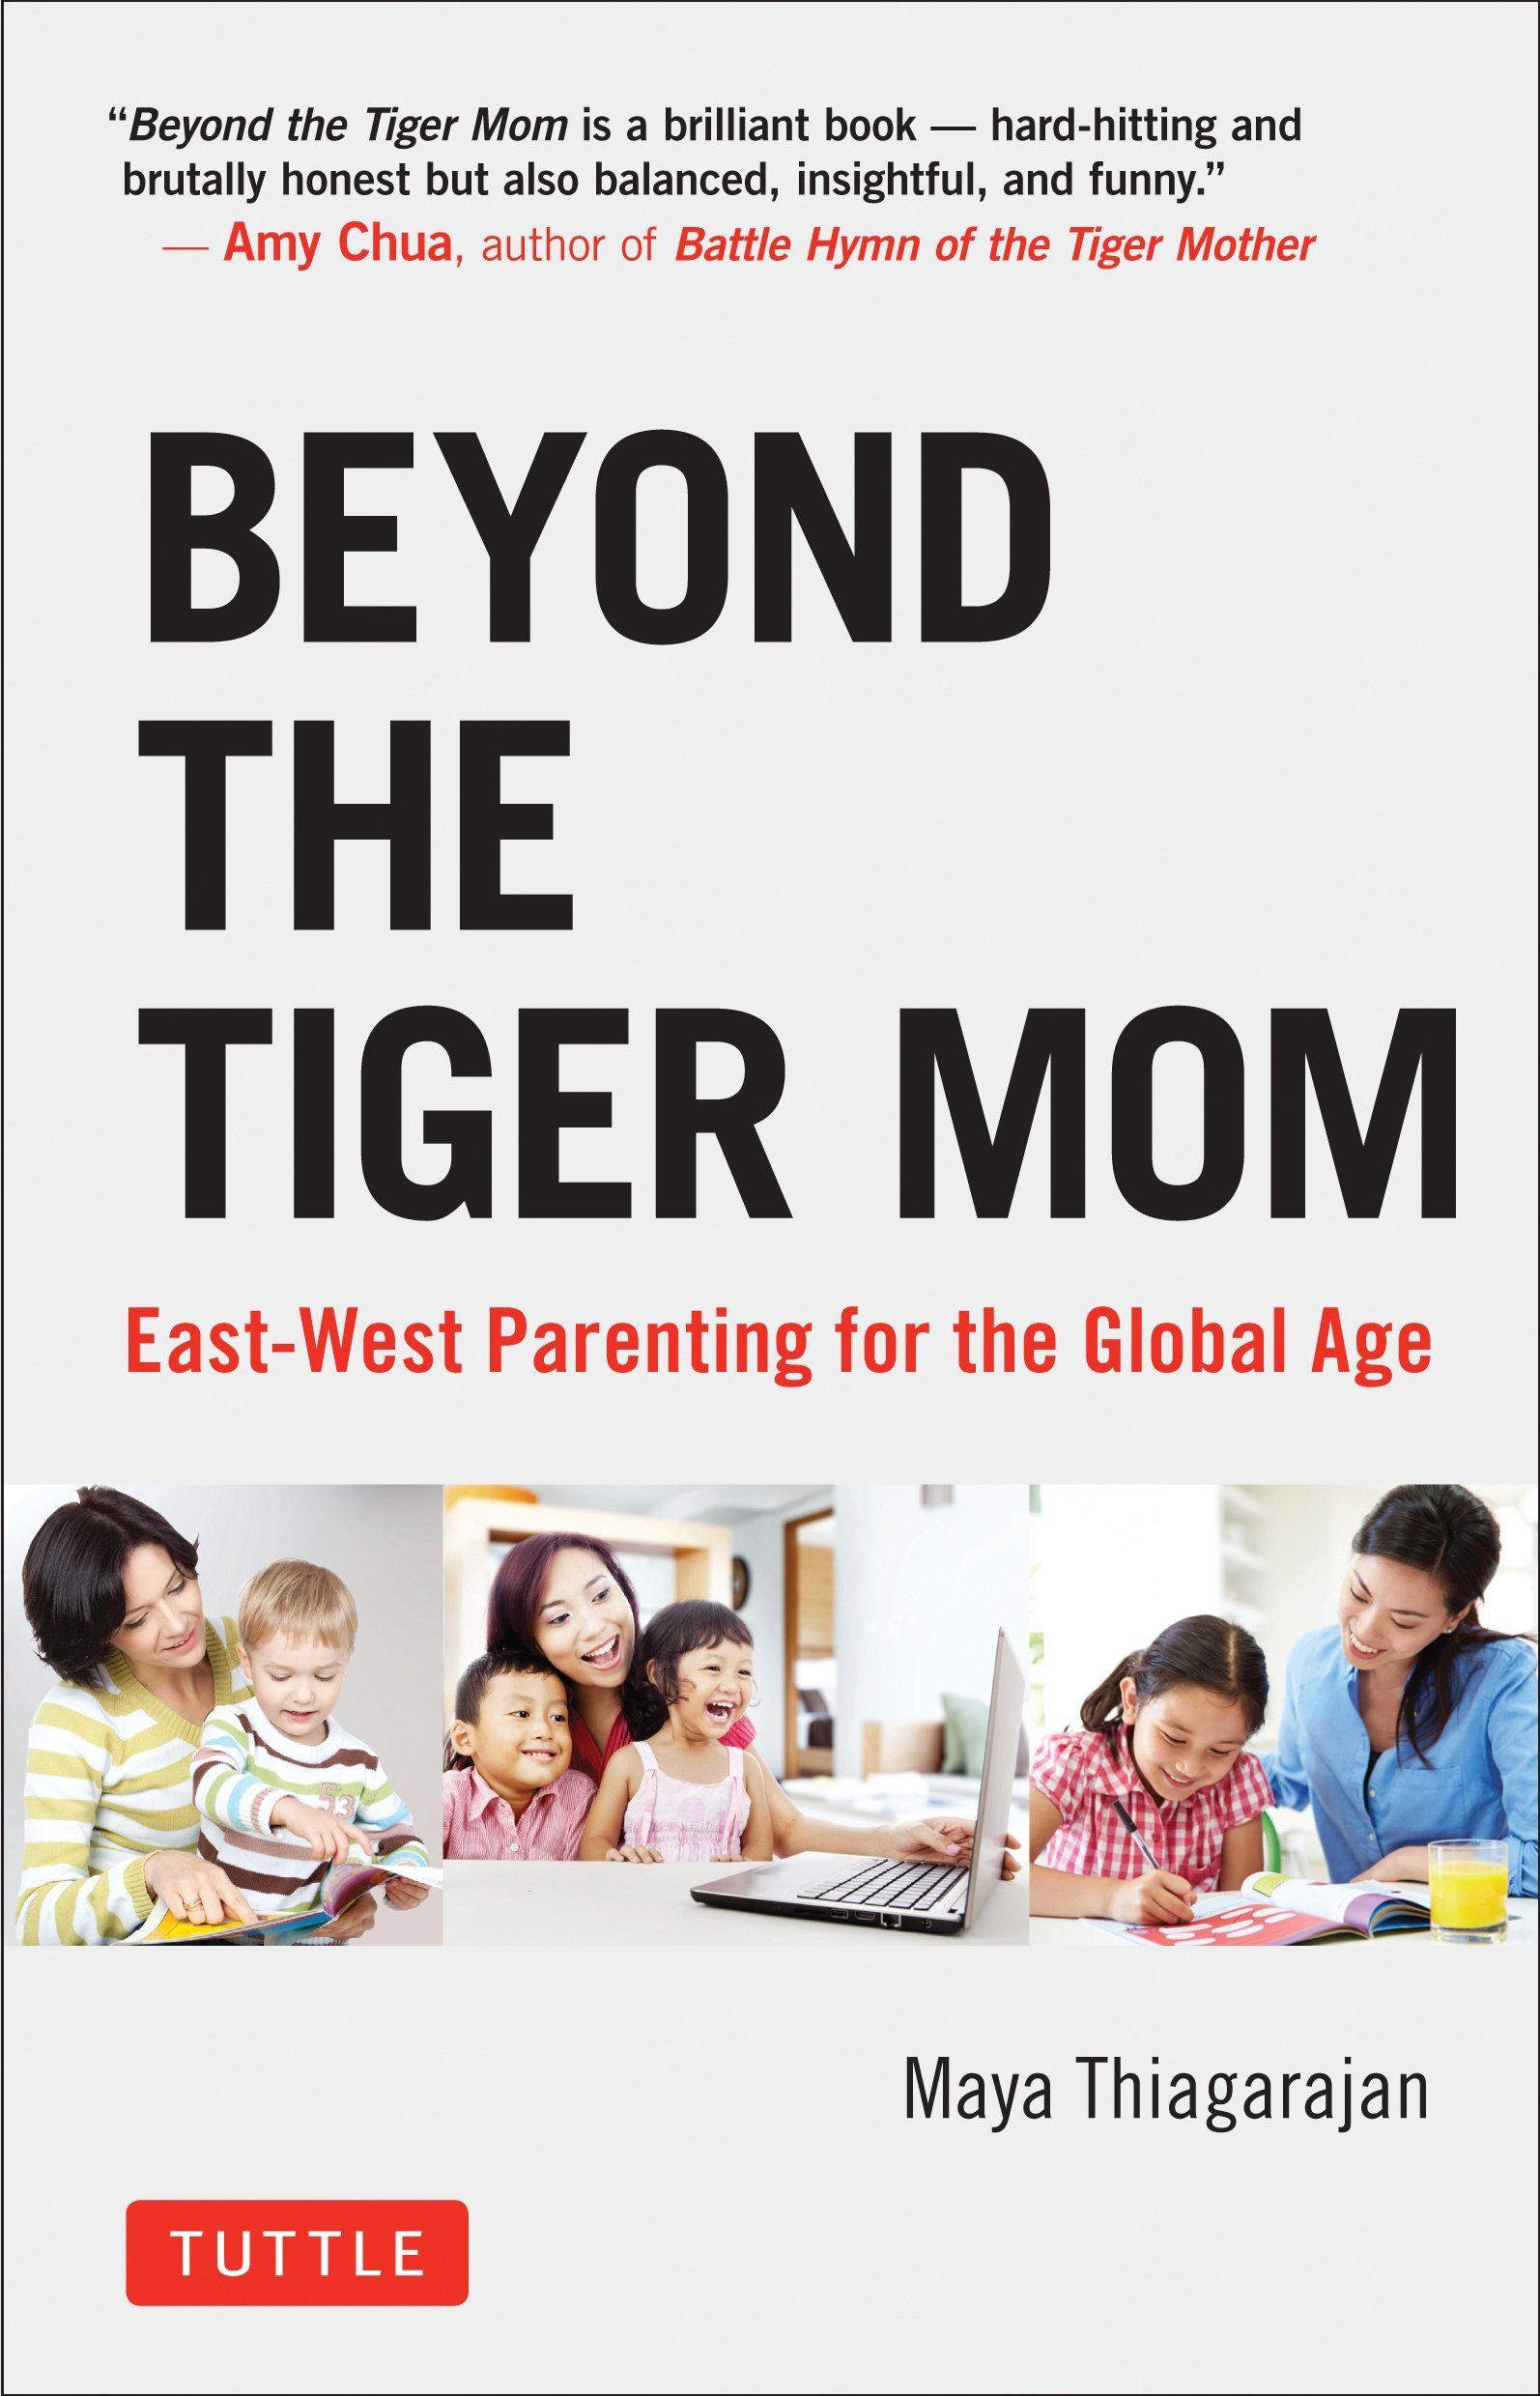 Beyond The Tiger Mom - a unique perspective on the differences of western and eastern parenting